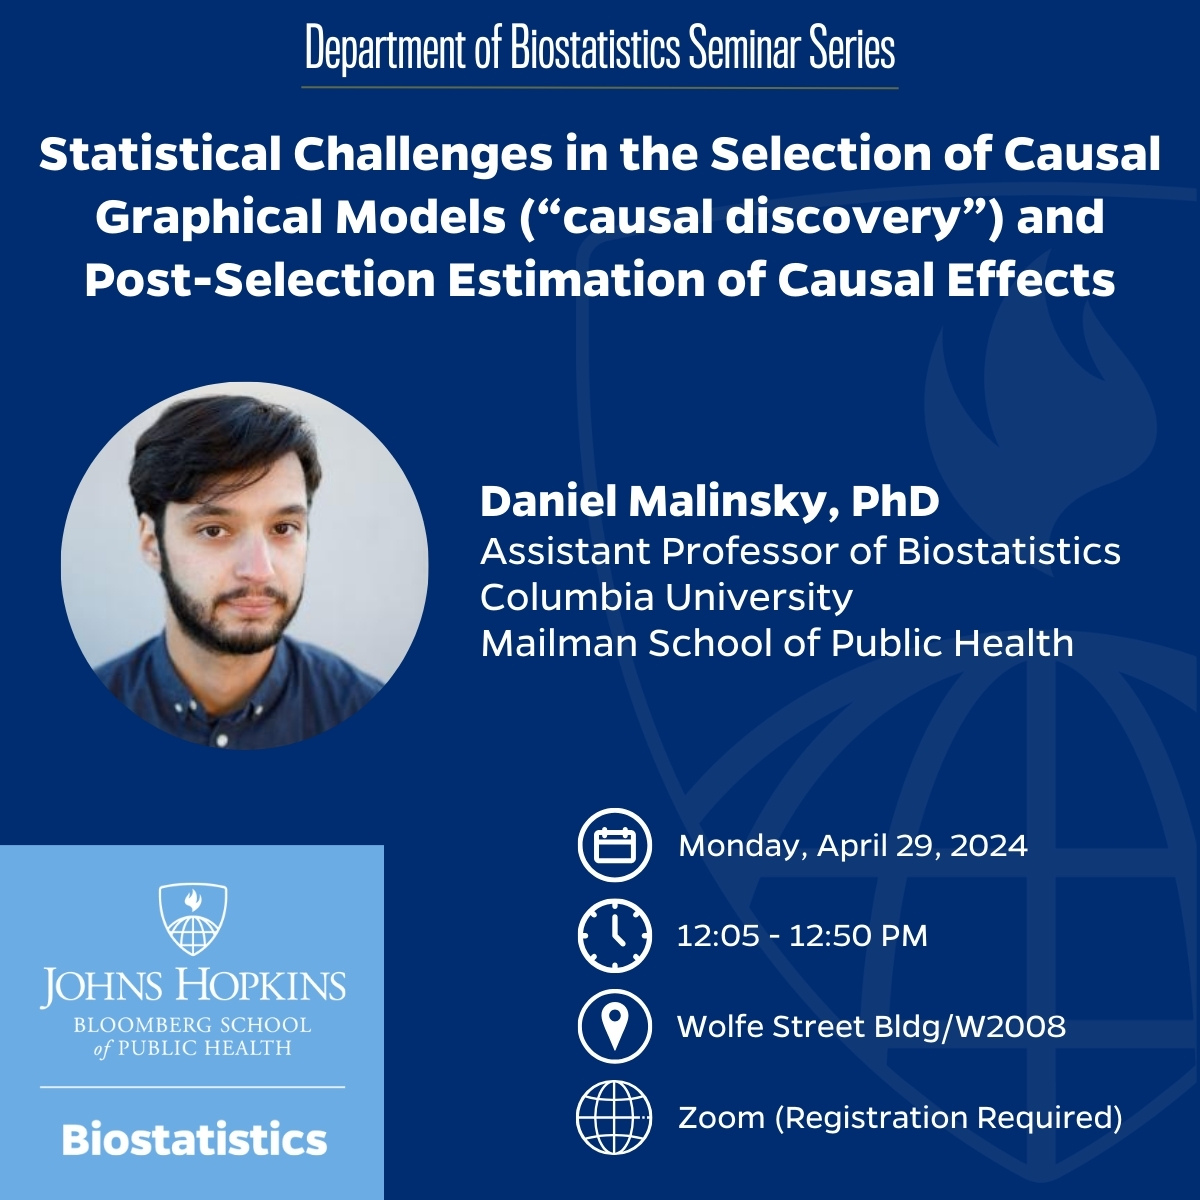 Join us via Zoom for our upcoming seminar, with speaker @d_malinsky, on Statistical Challenges in the Selection of Causal Graphical Models and Post Selection Estimation of Causal Effects, next Monday, April 29. Register online: publichealth.jhu.edu/events/2024/bi…